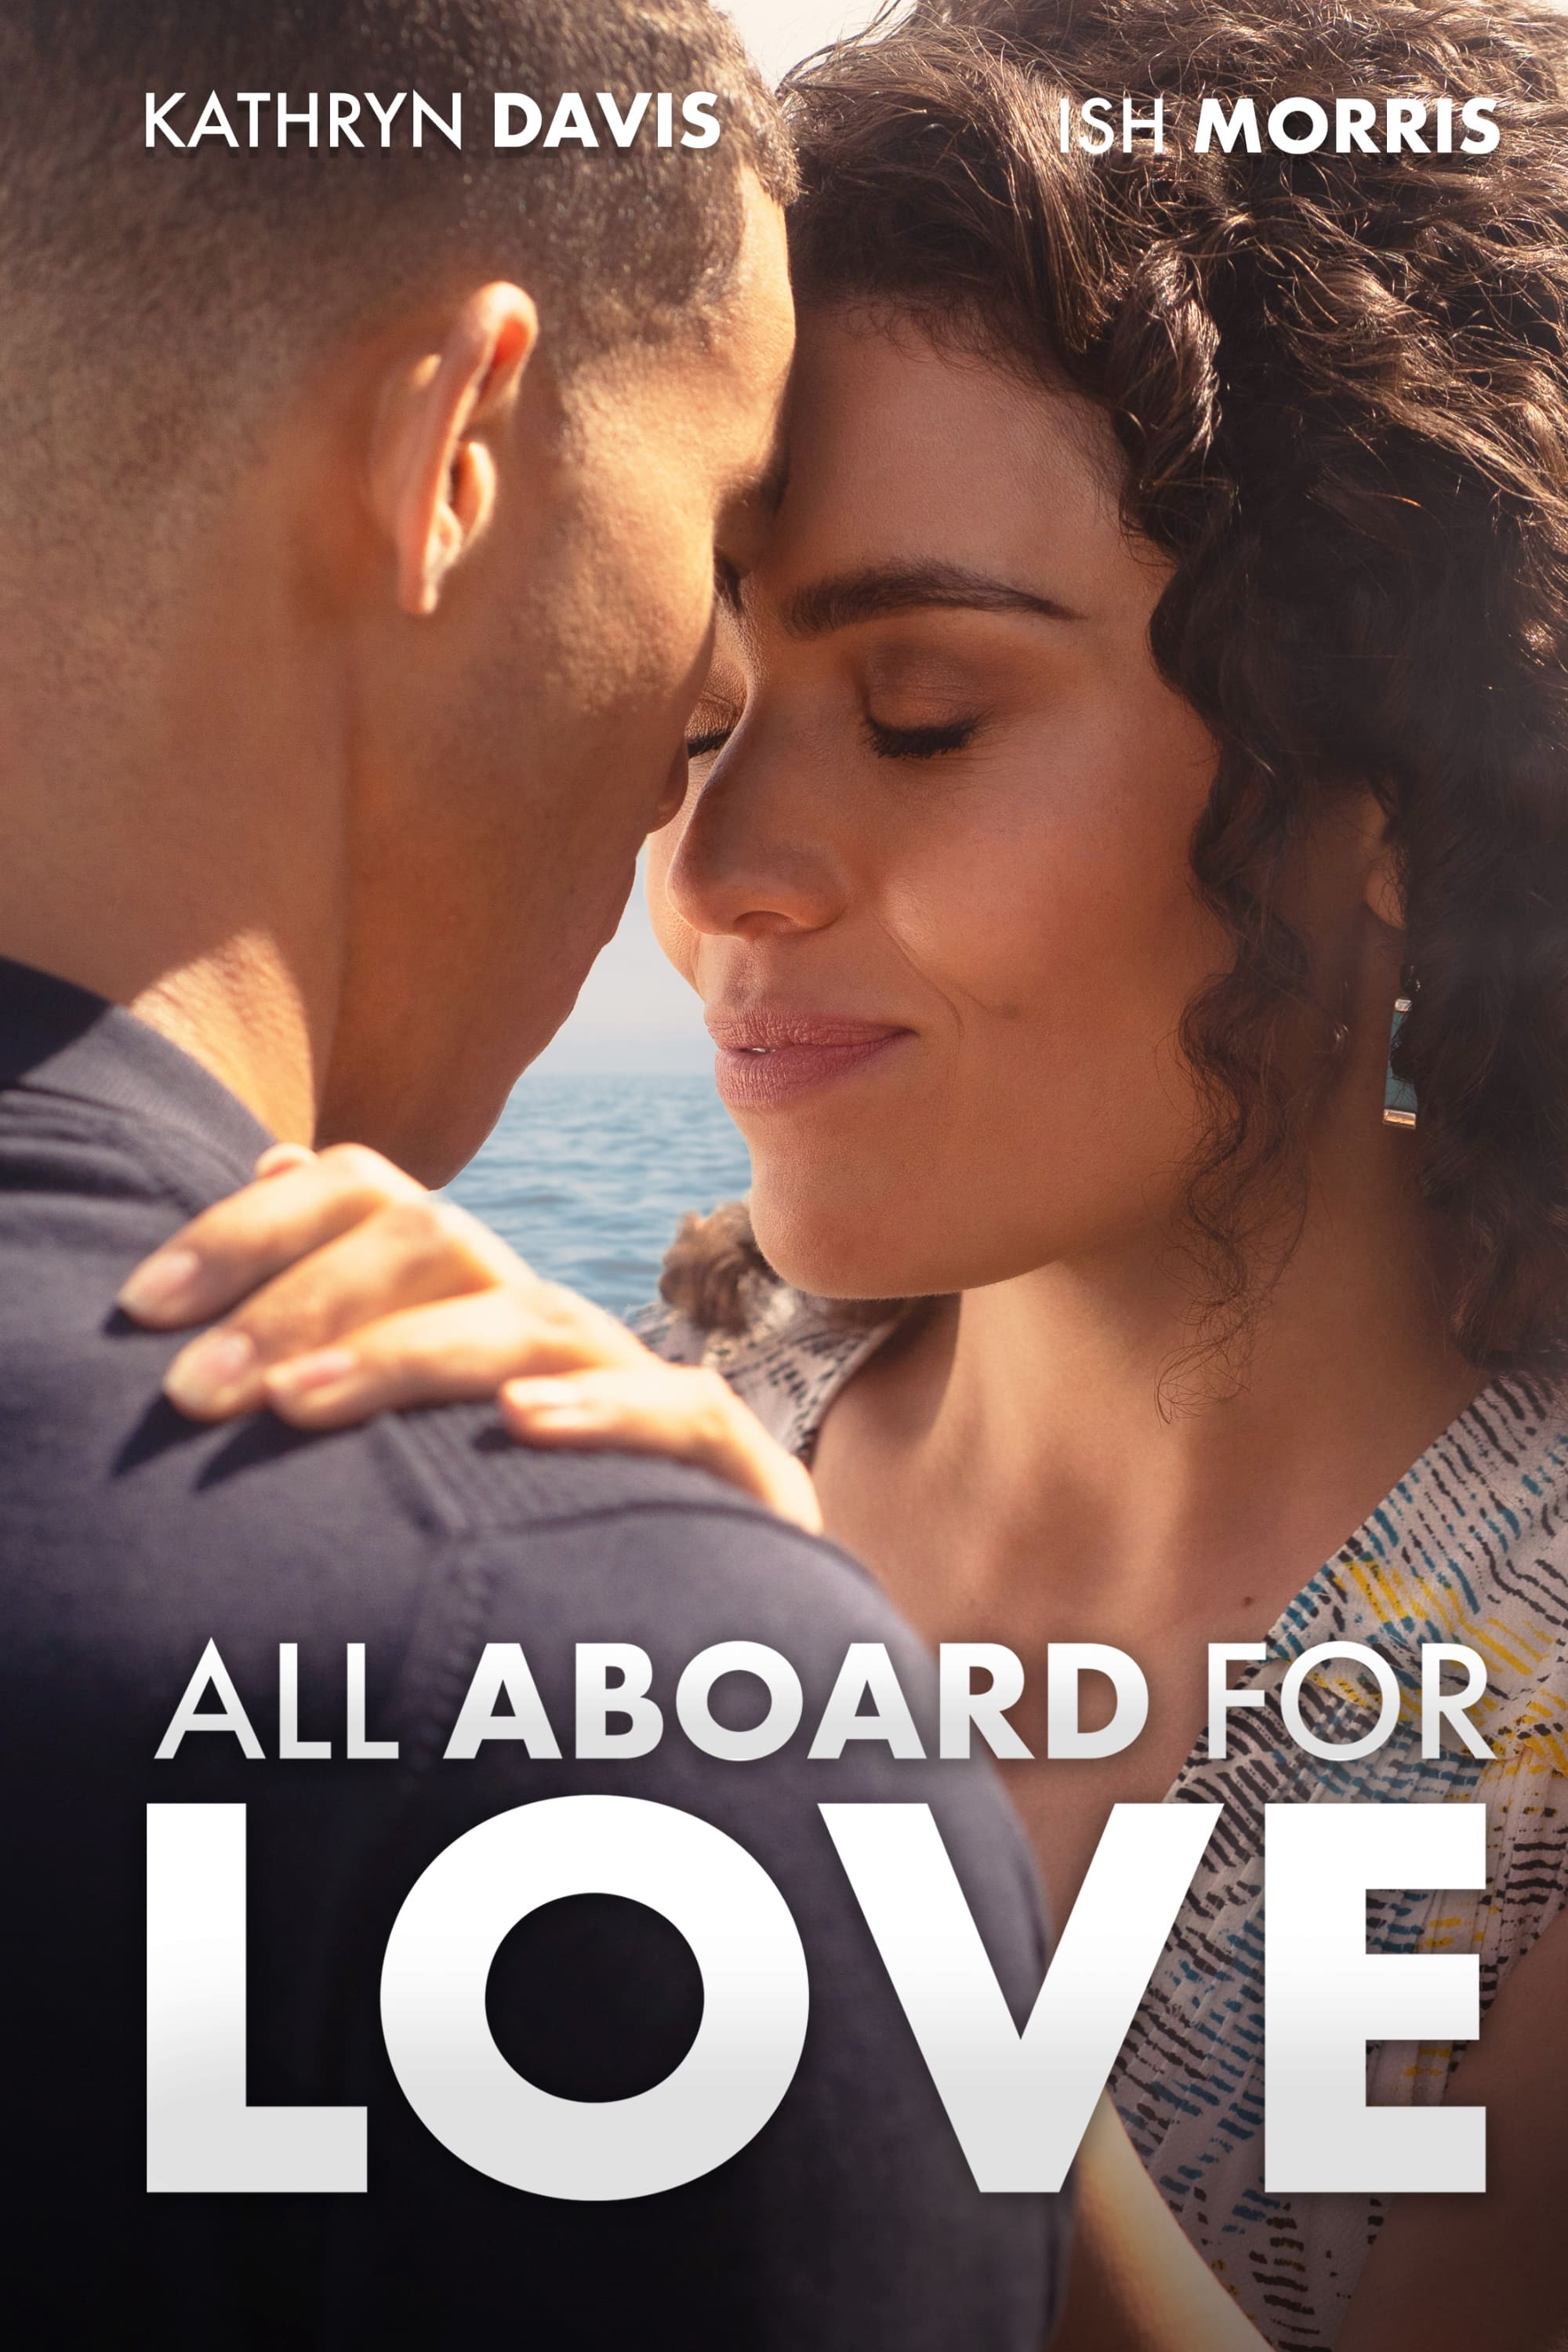 All Aboard for Love film